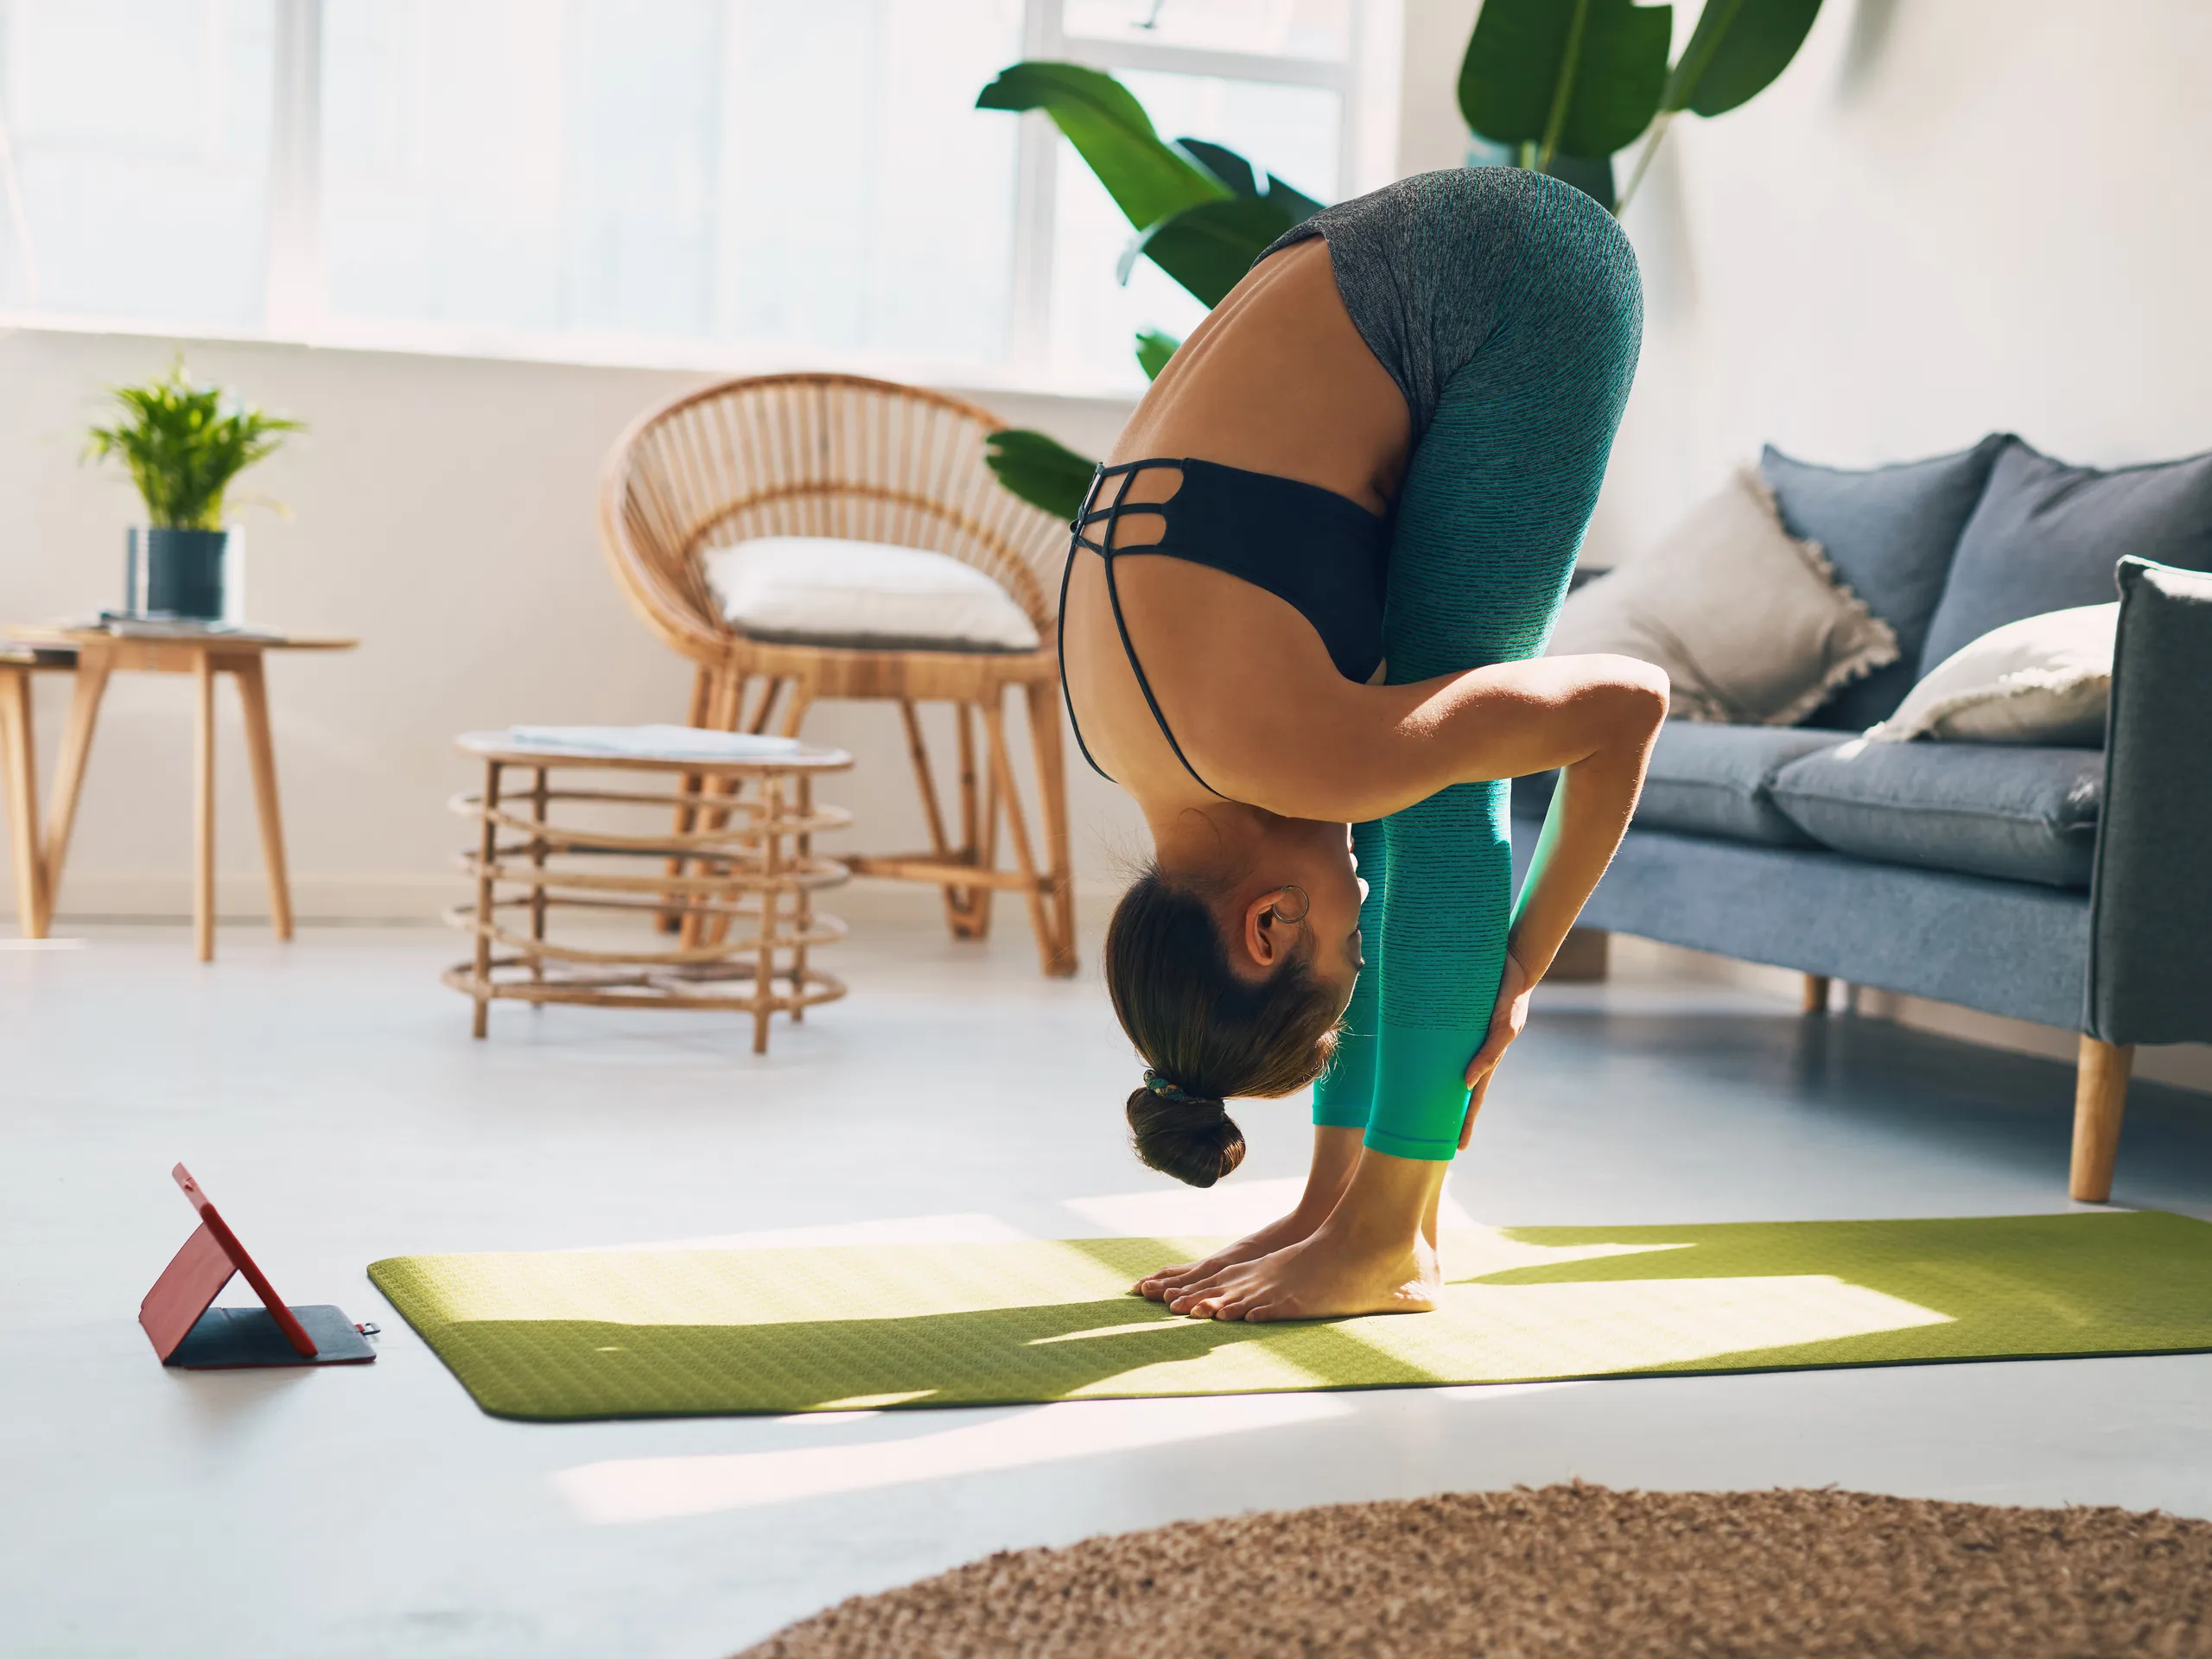 Five breathing tricks you can practice at home from a yoga expert